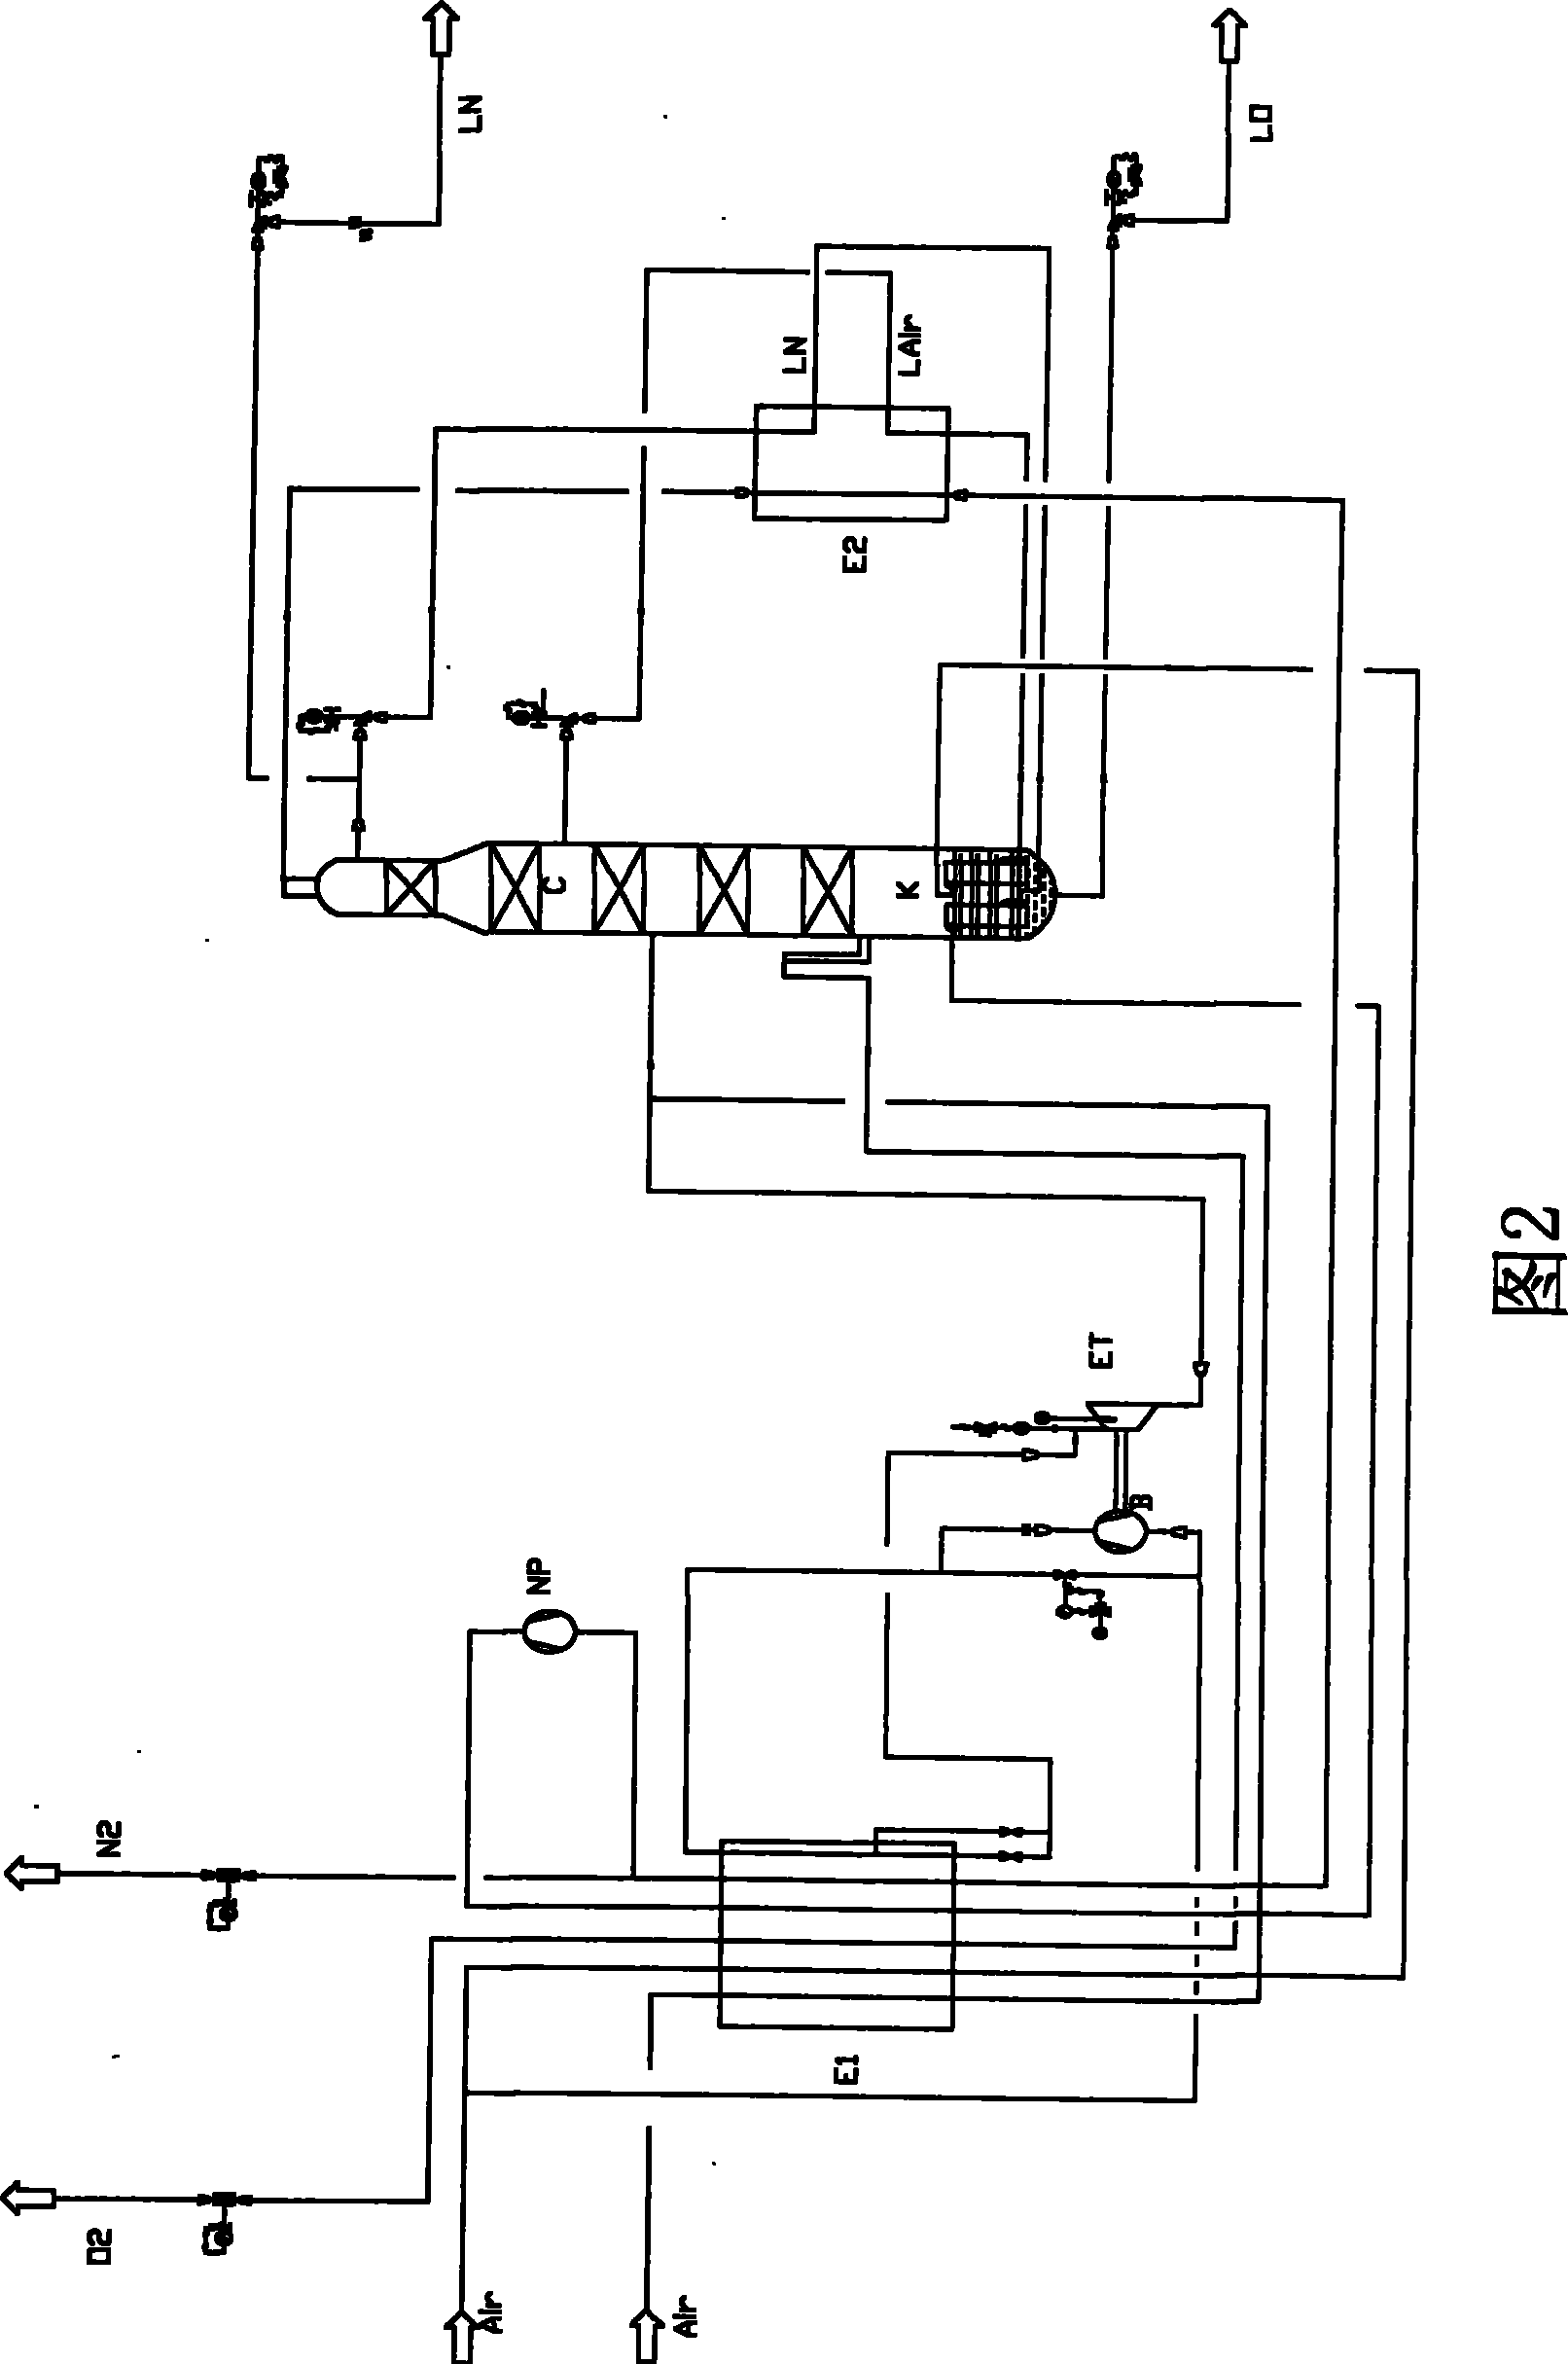 Ultra-low pressure single-column deep-cooling space division technique